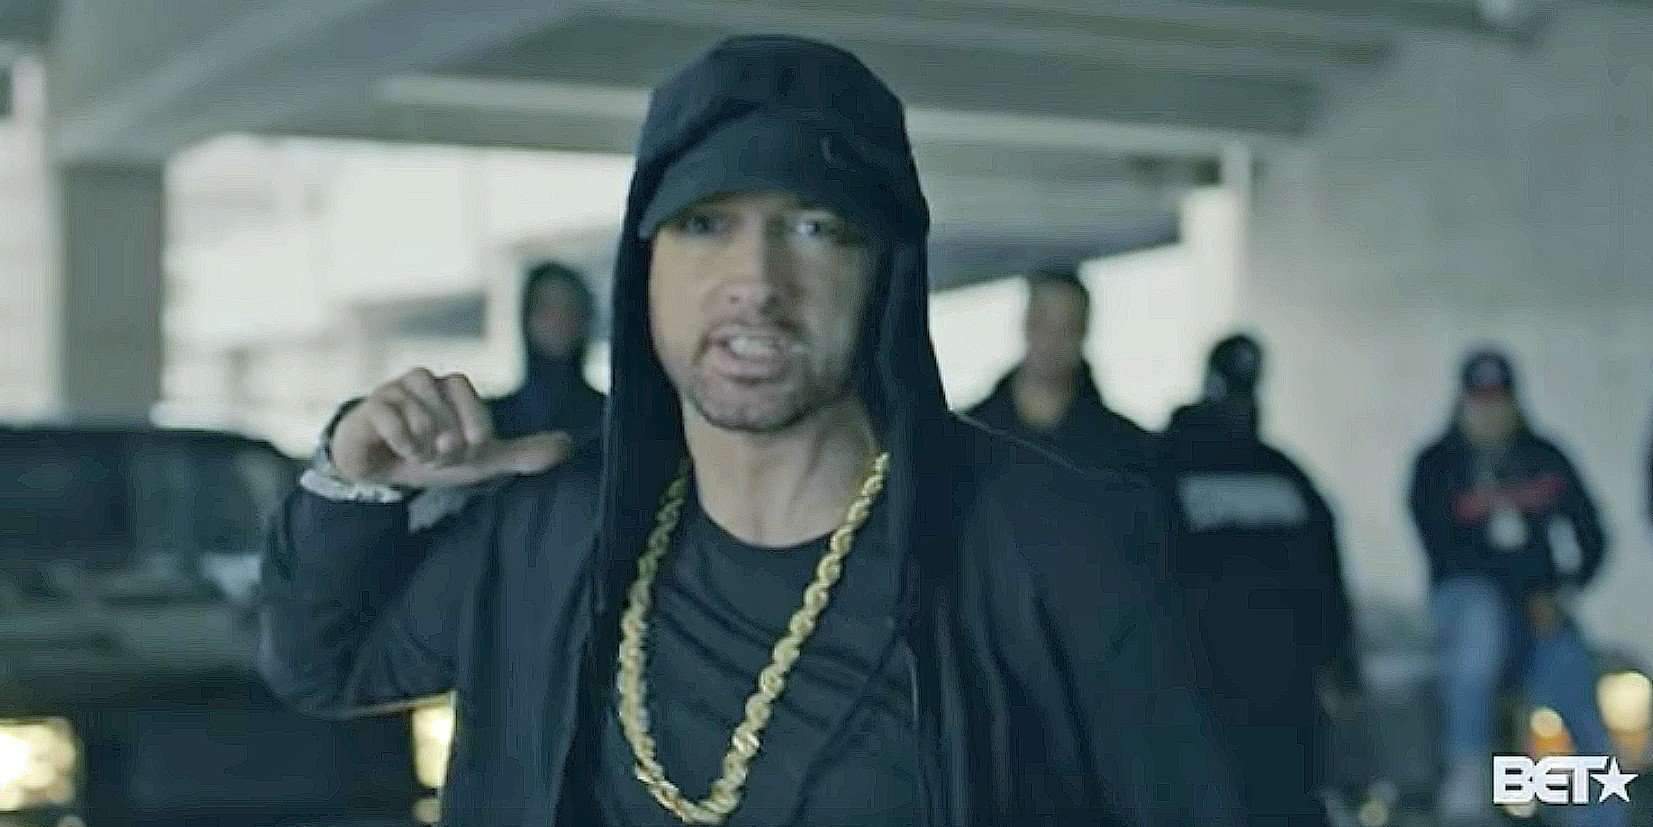 white allies, eminem, black excellence, racial justice